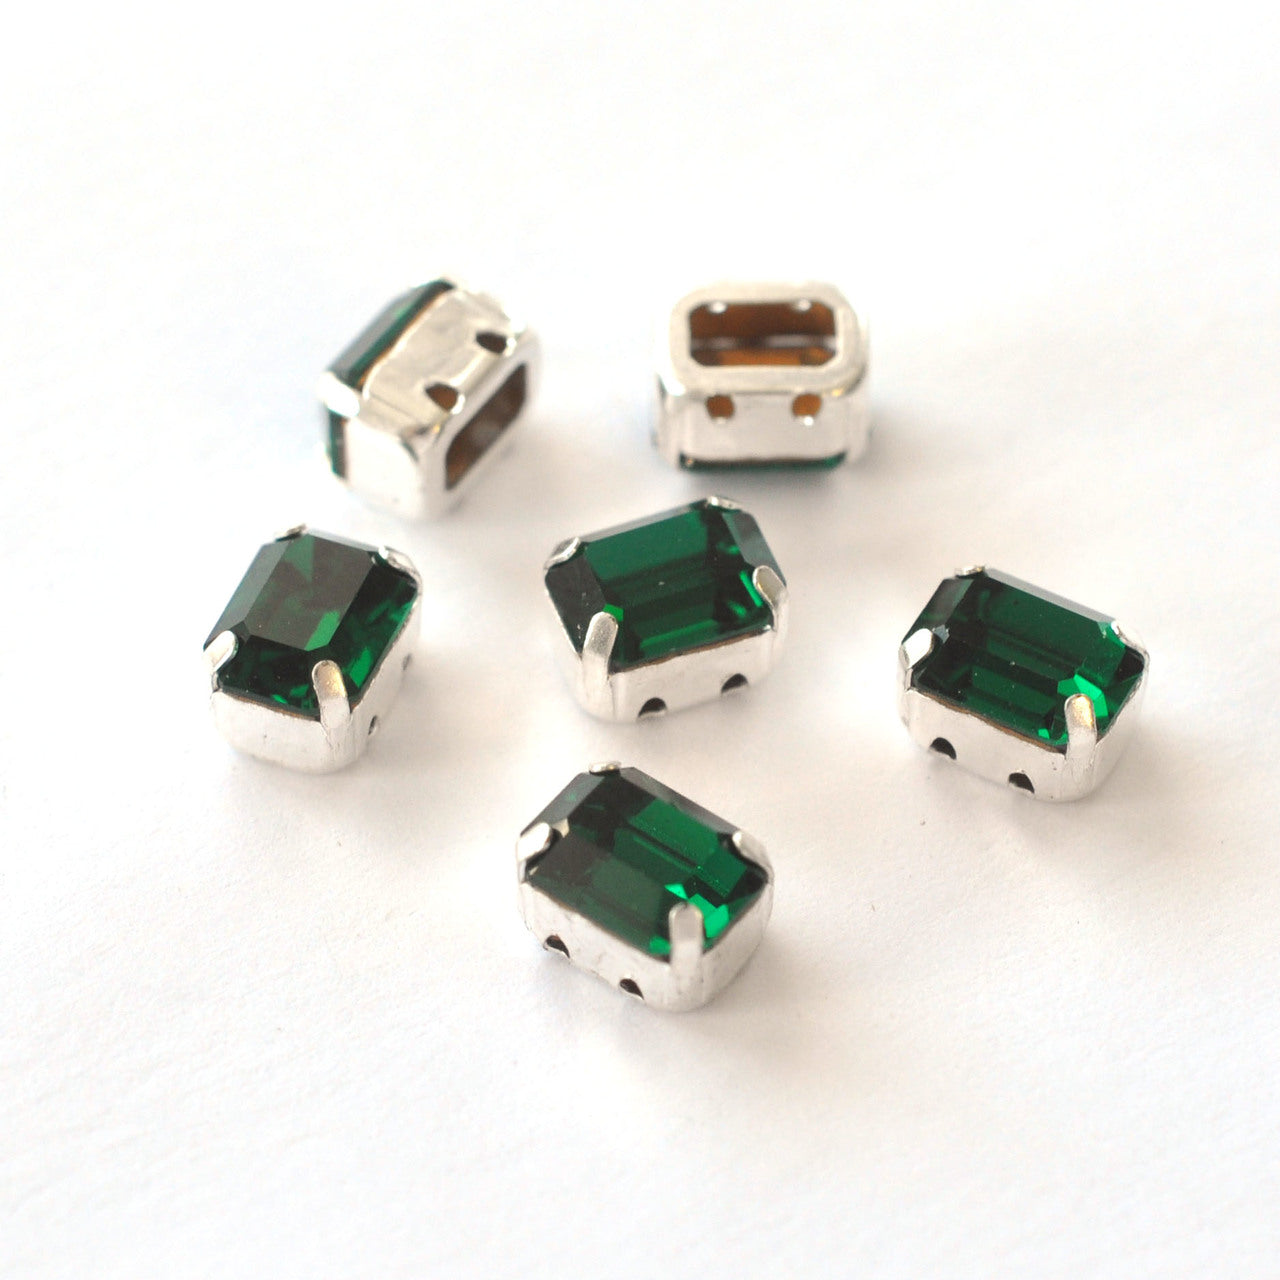 Emerald 8x6mm Octagon Sew On Crystals - 6 Pieces